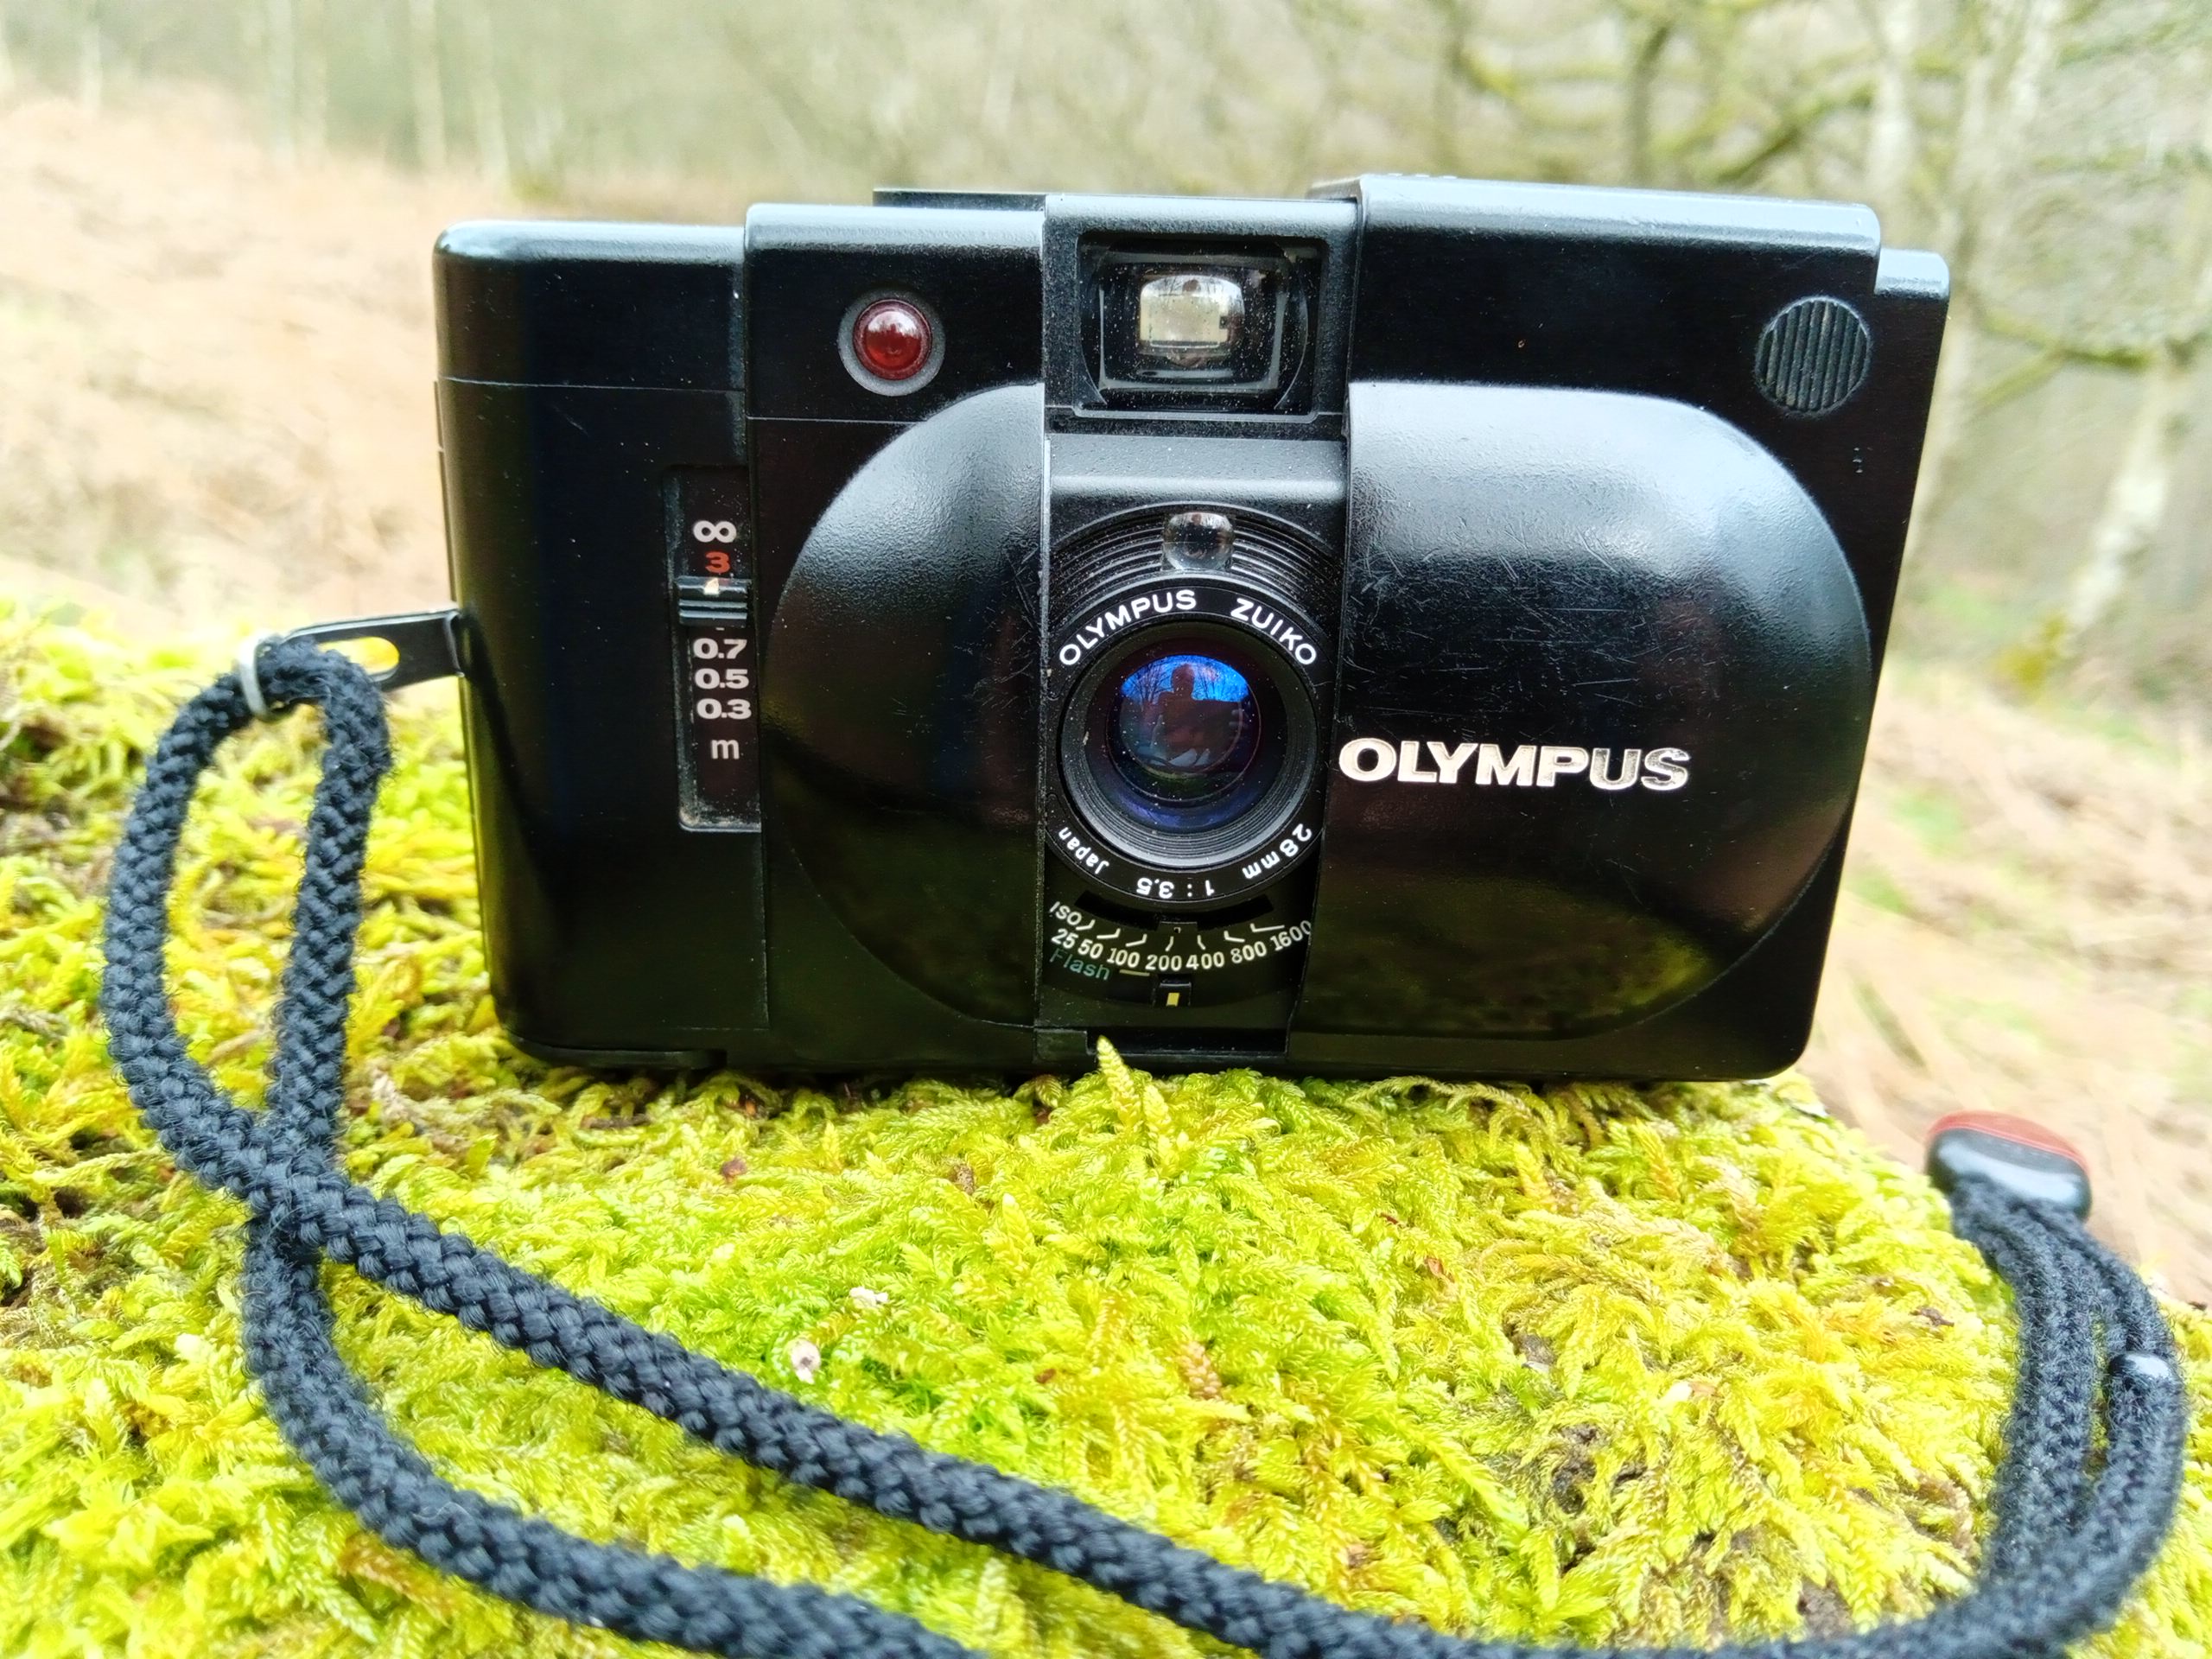 XA4 sitting pretty on a bed of moss